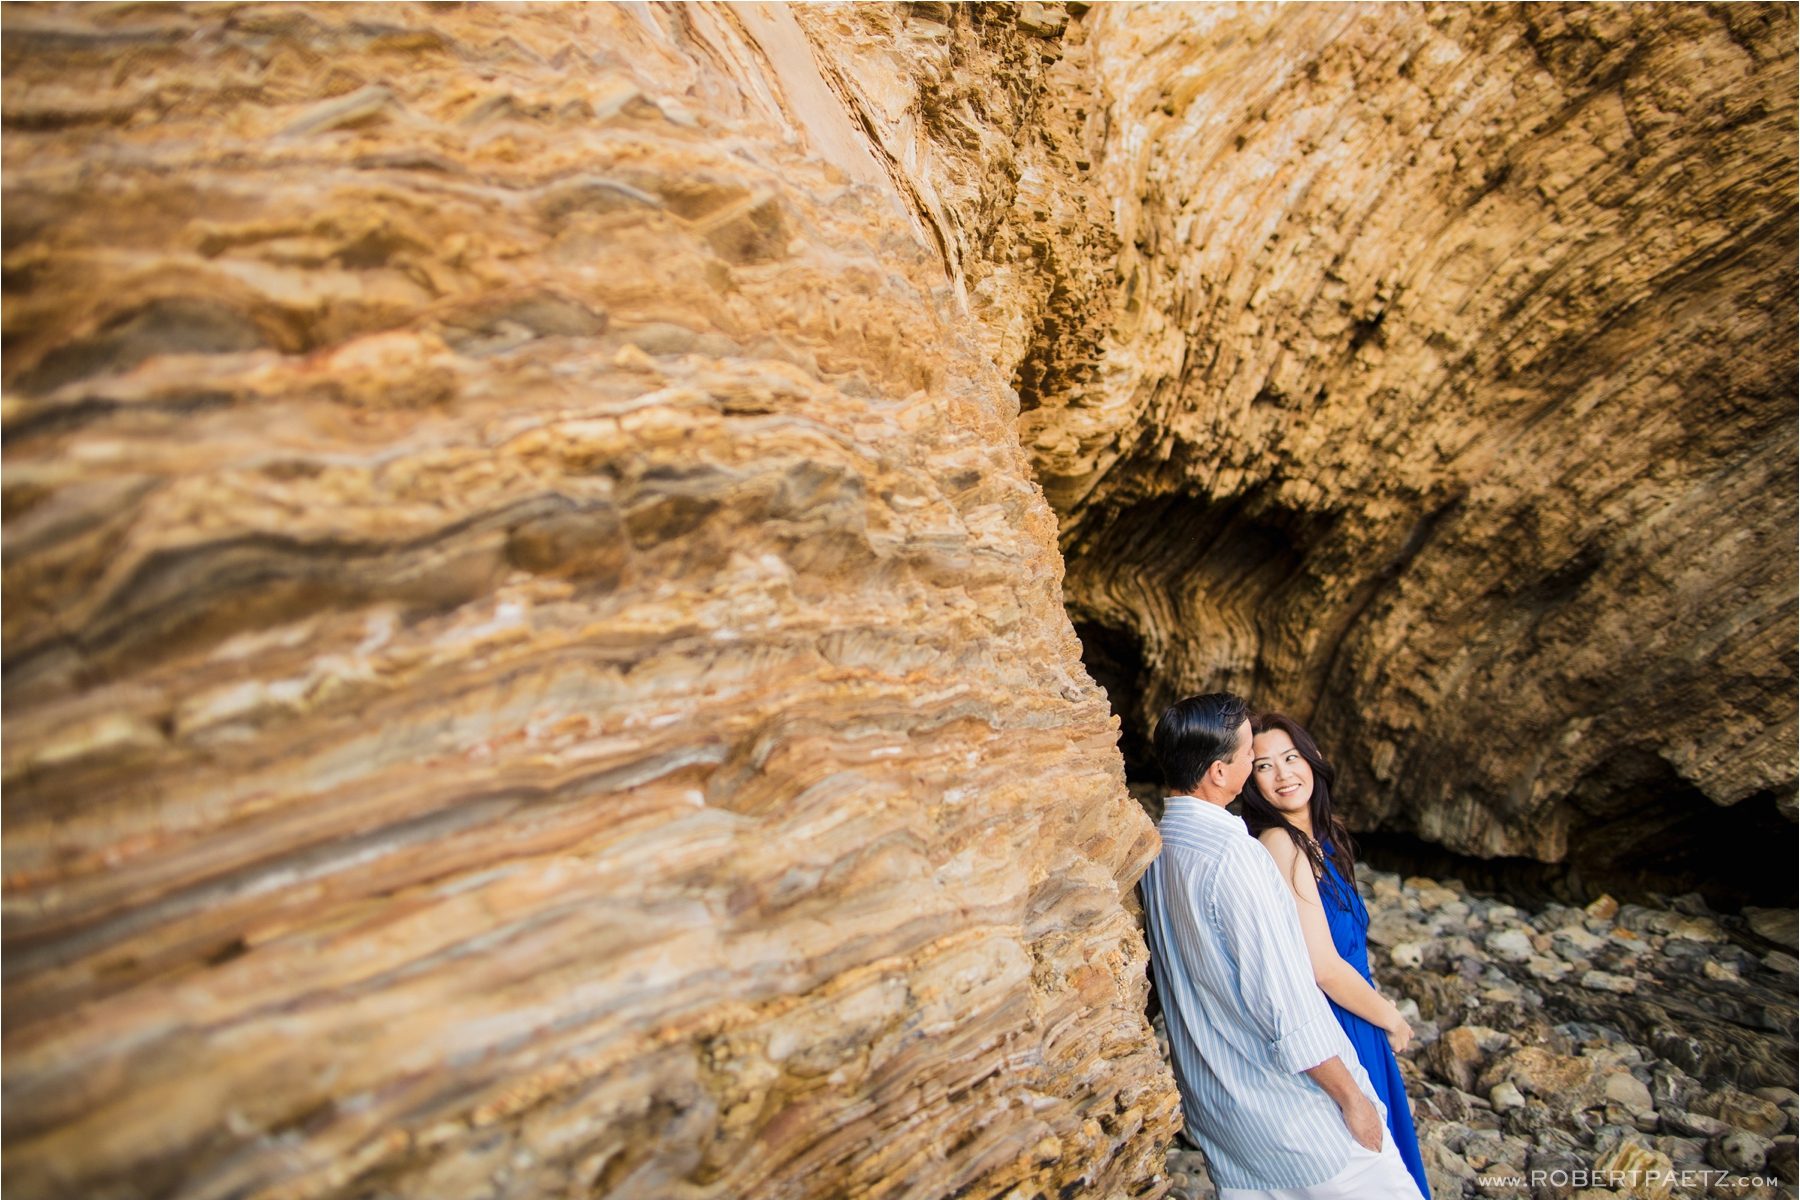 An Engagement photography session at Crystal Cove State Park in Newport Beach, California photographed by the destination wedding photographer, Robert Paetz, who is based in Los Angeles. 